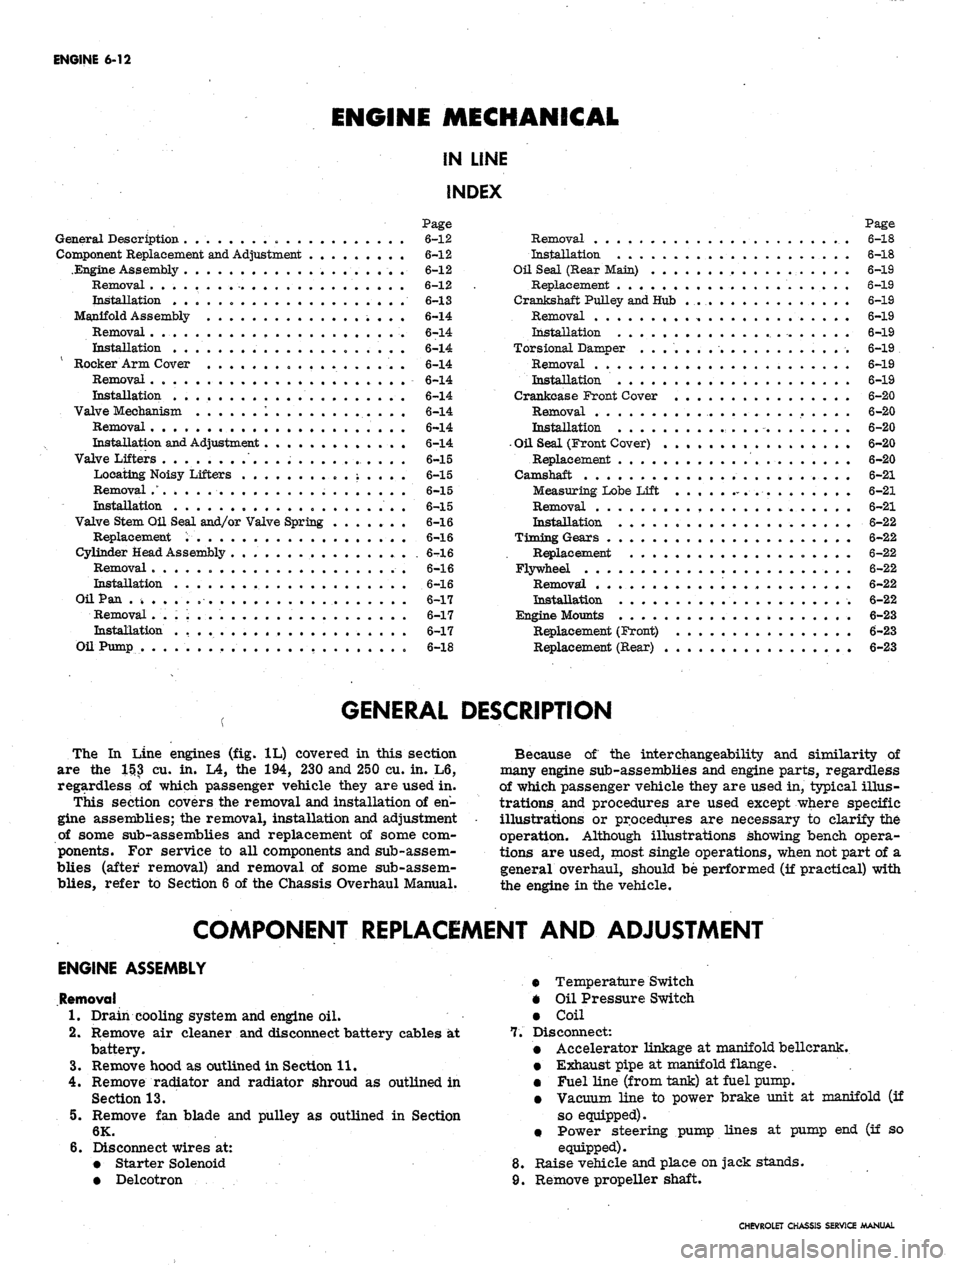 CHEVROLET CAMARO 1967 1.G Chassis Workshop Manual 
ENGINE
 6-12

ENGINE
 MECHANICAL

IN LINE

INDEX

Page

General Description . „ 6-12

Component Replacement and Adjustment 6-12

.Engine Assembly 6-12

Removal 6-12

Installation 6-13

Manifold Ass